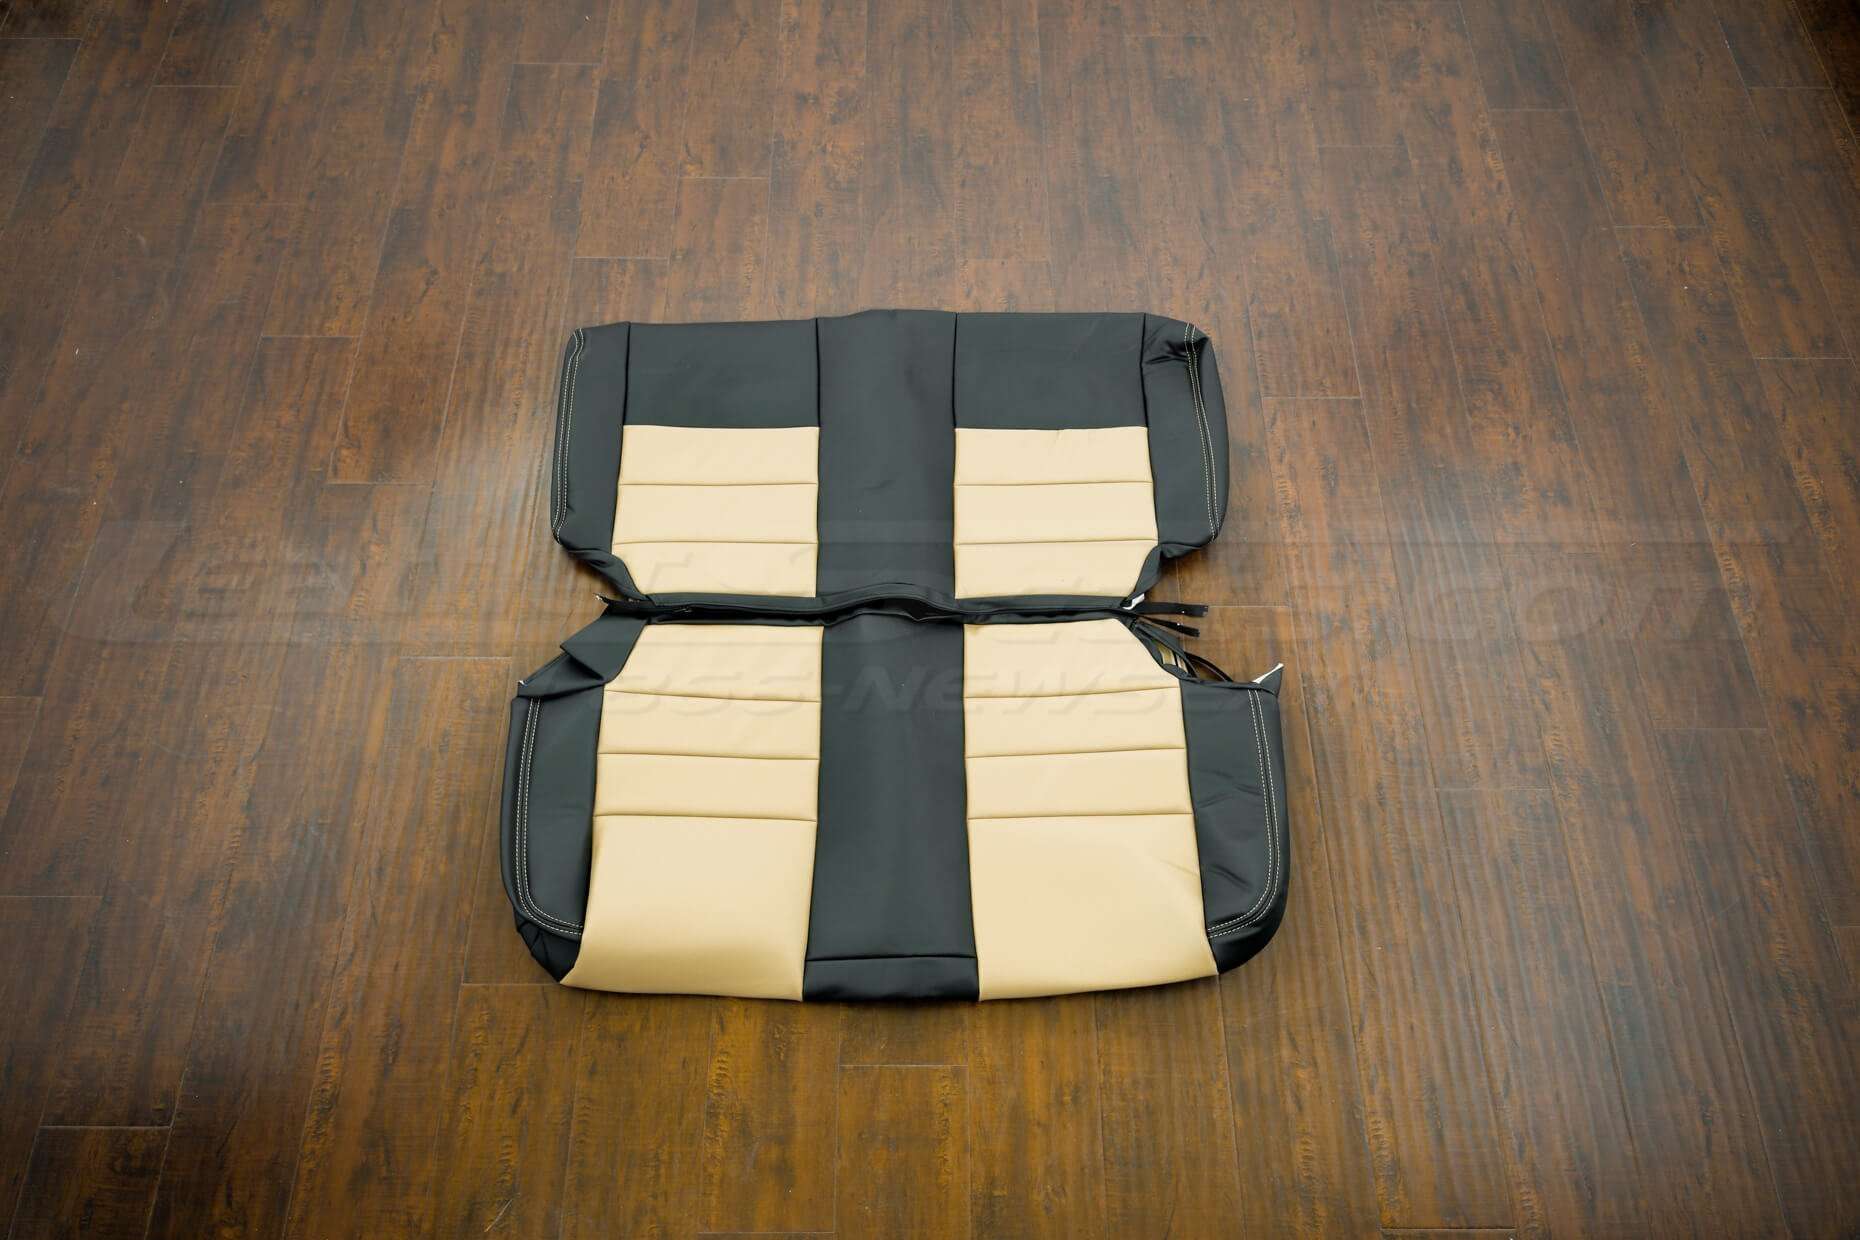 Jeep Wrangler Upholstery Kit - Black & Bisque Rear seats